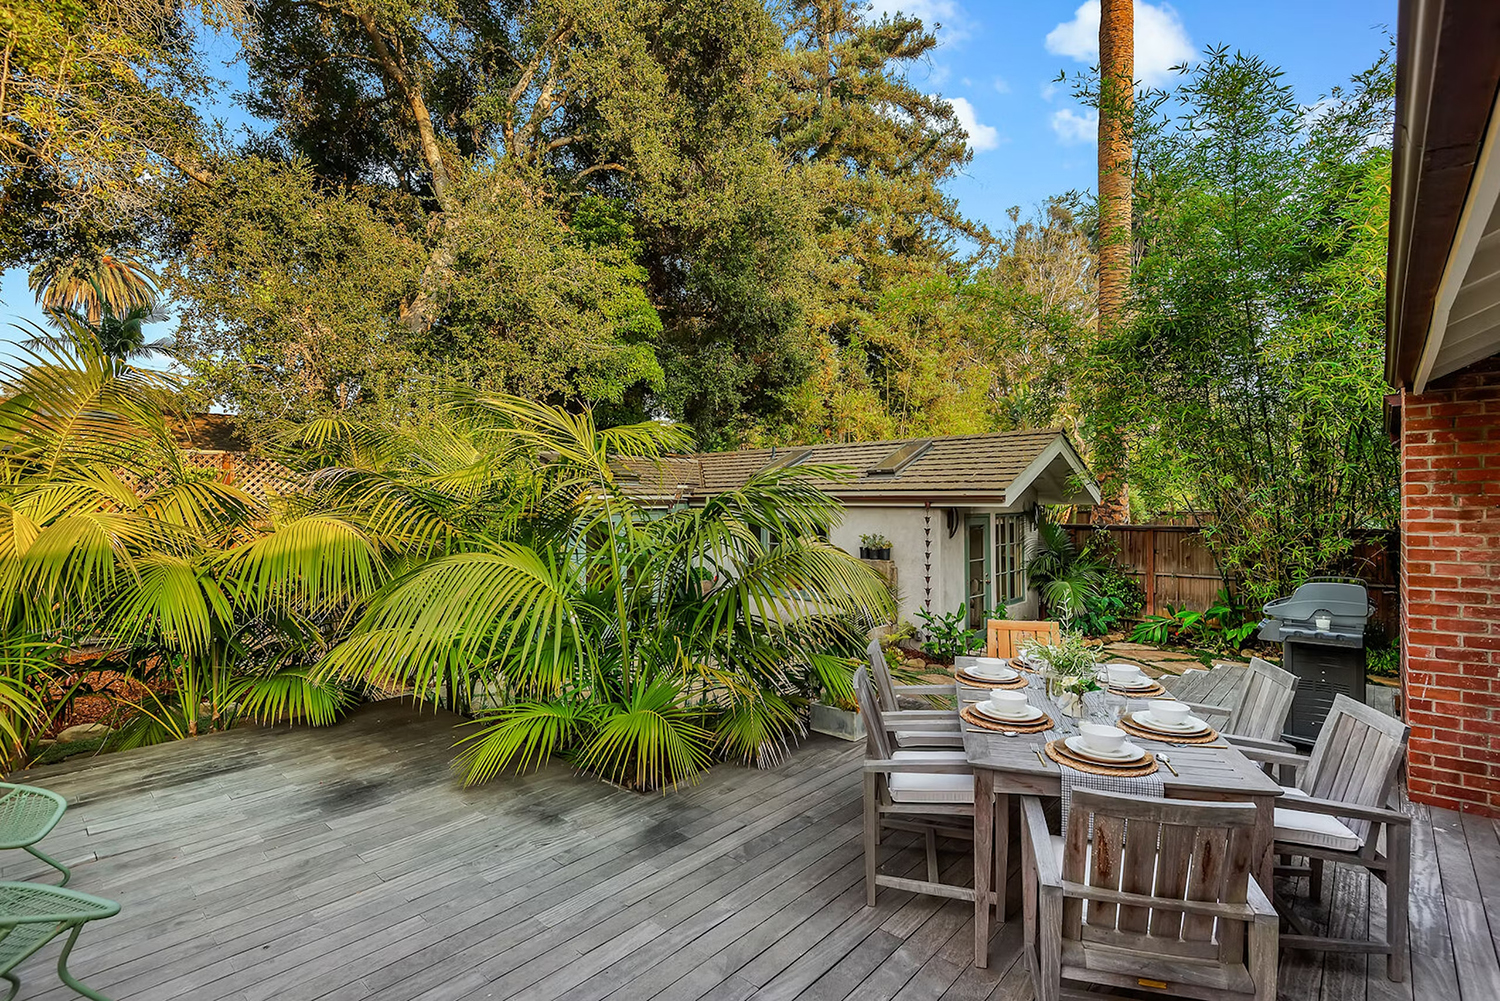 Patio and wooden deck with much greenery at Montecito California vacation rental home called California Iris.